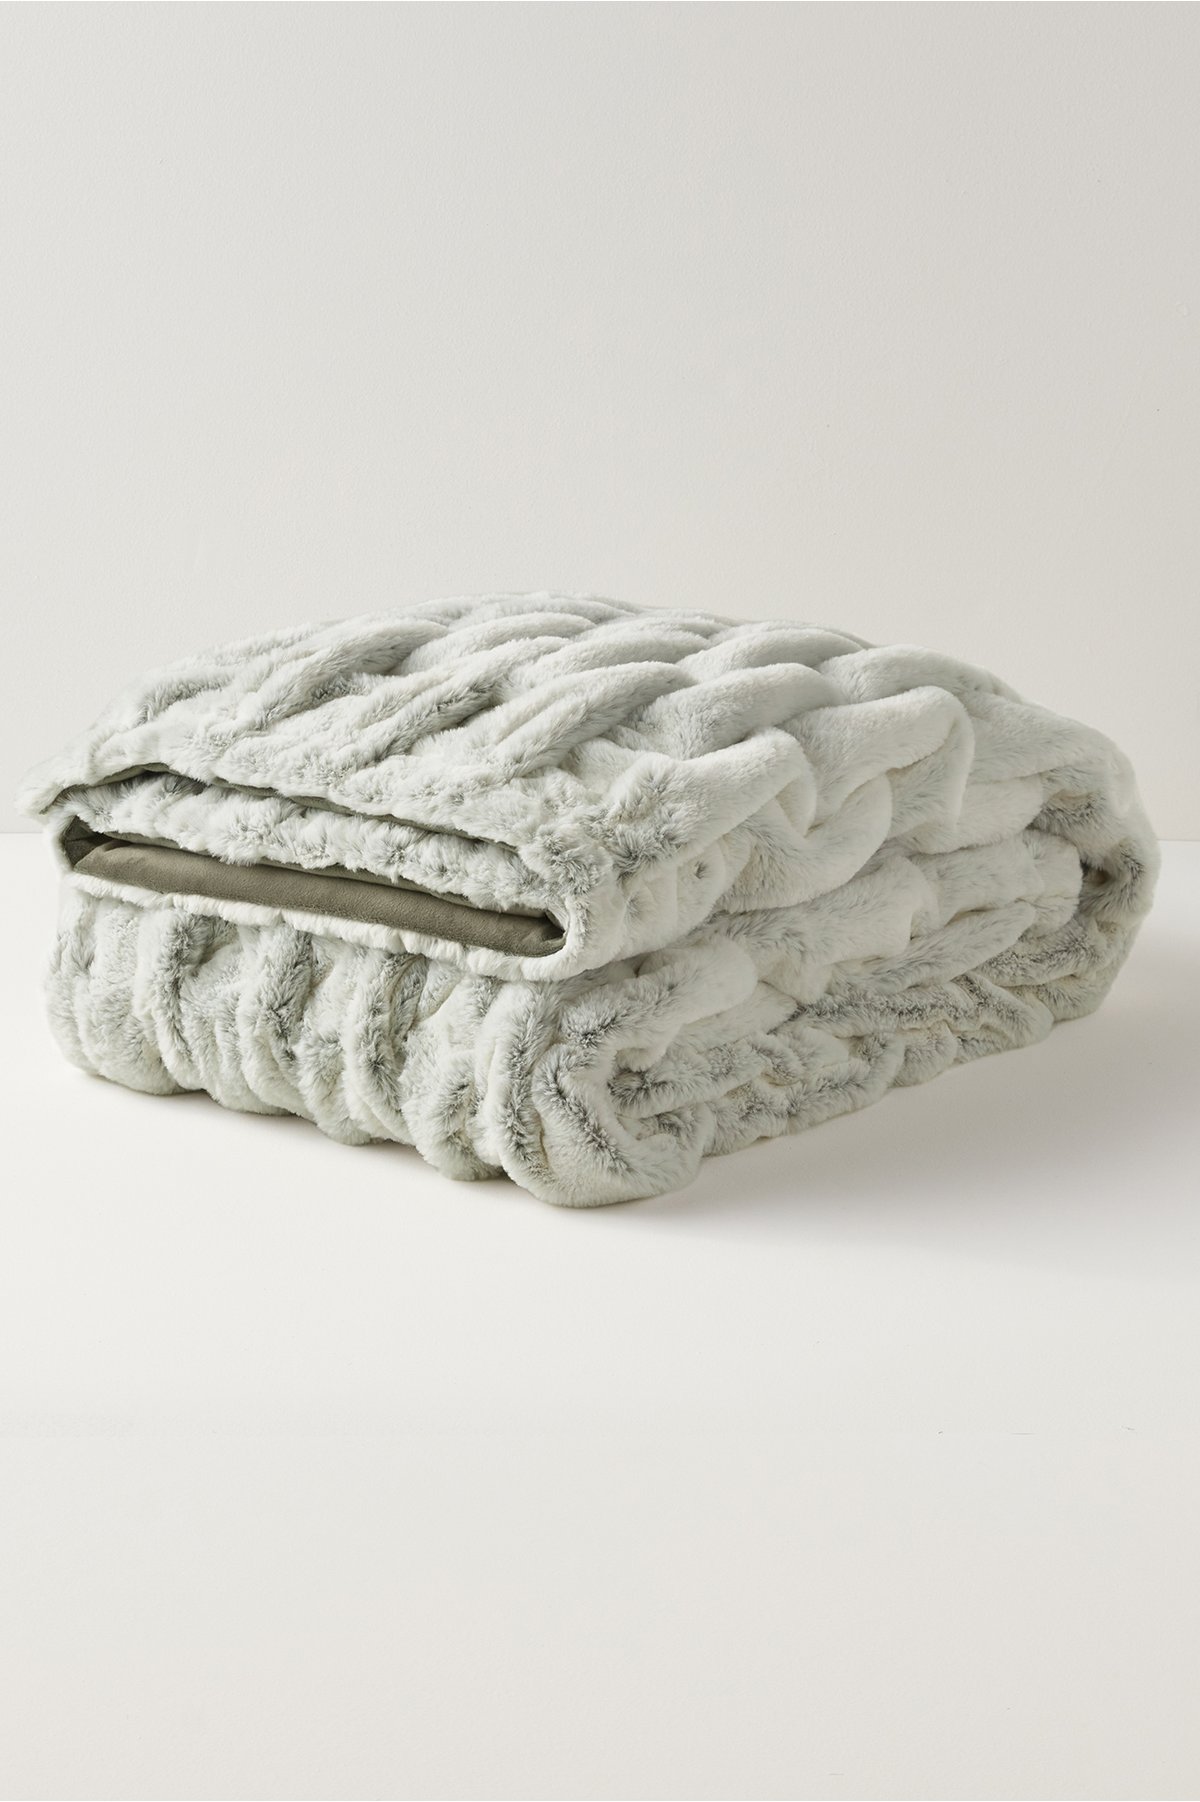 La Parisienne Faux Fur Throw Blanket by Soft Surroundings, in Tipped Agave